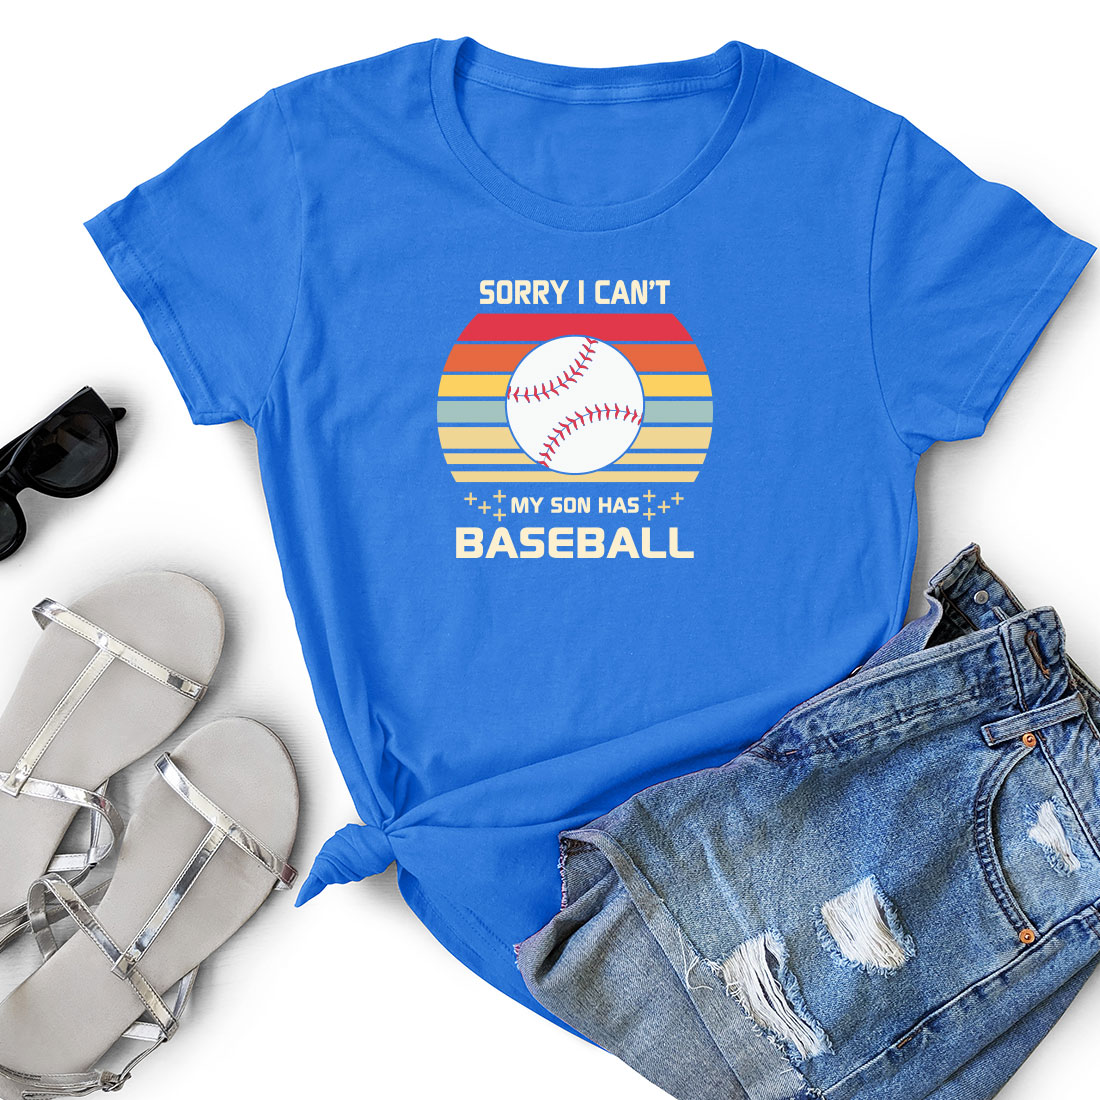 T - shirt that says sorry i can't play baseball.